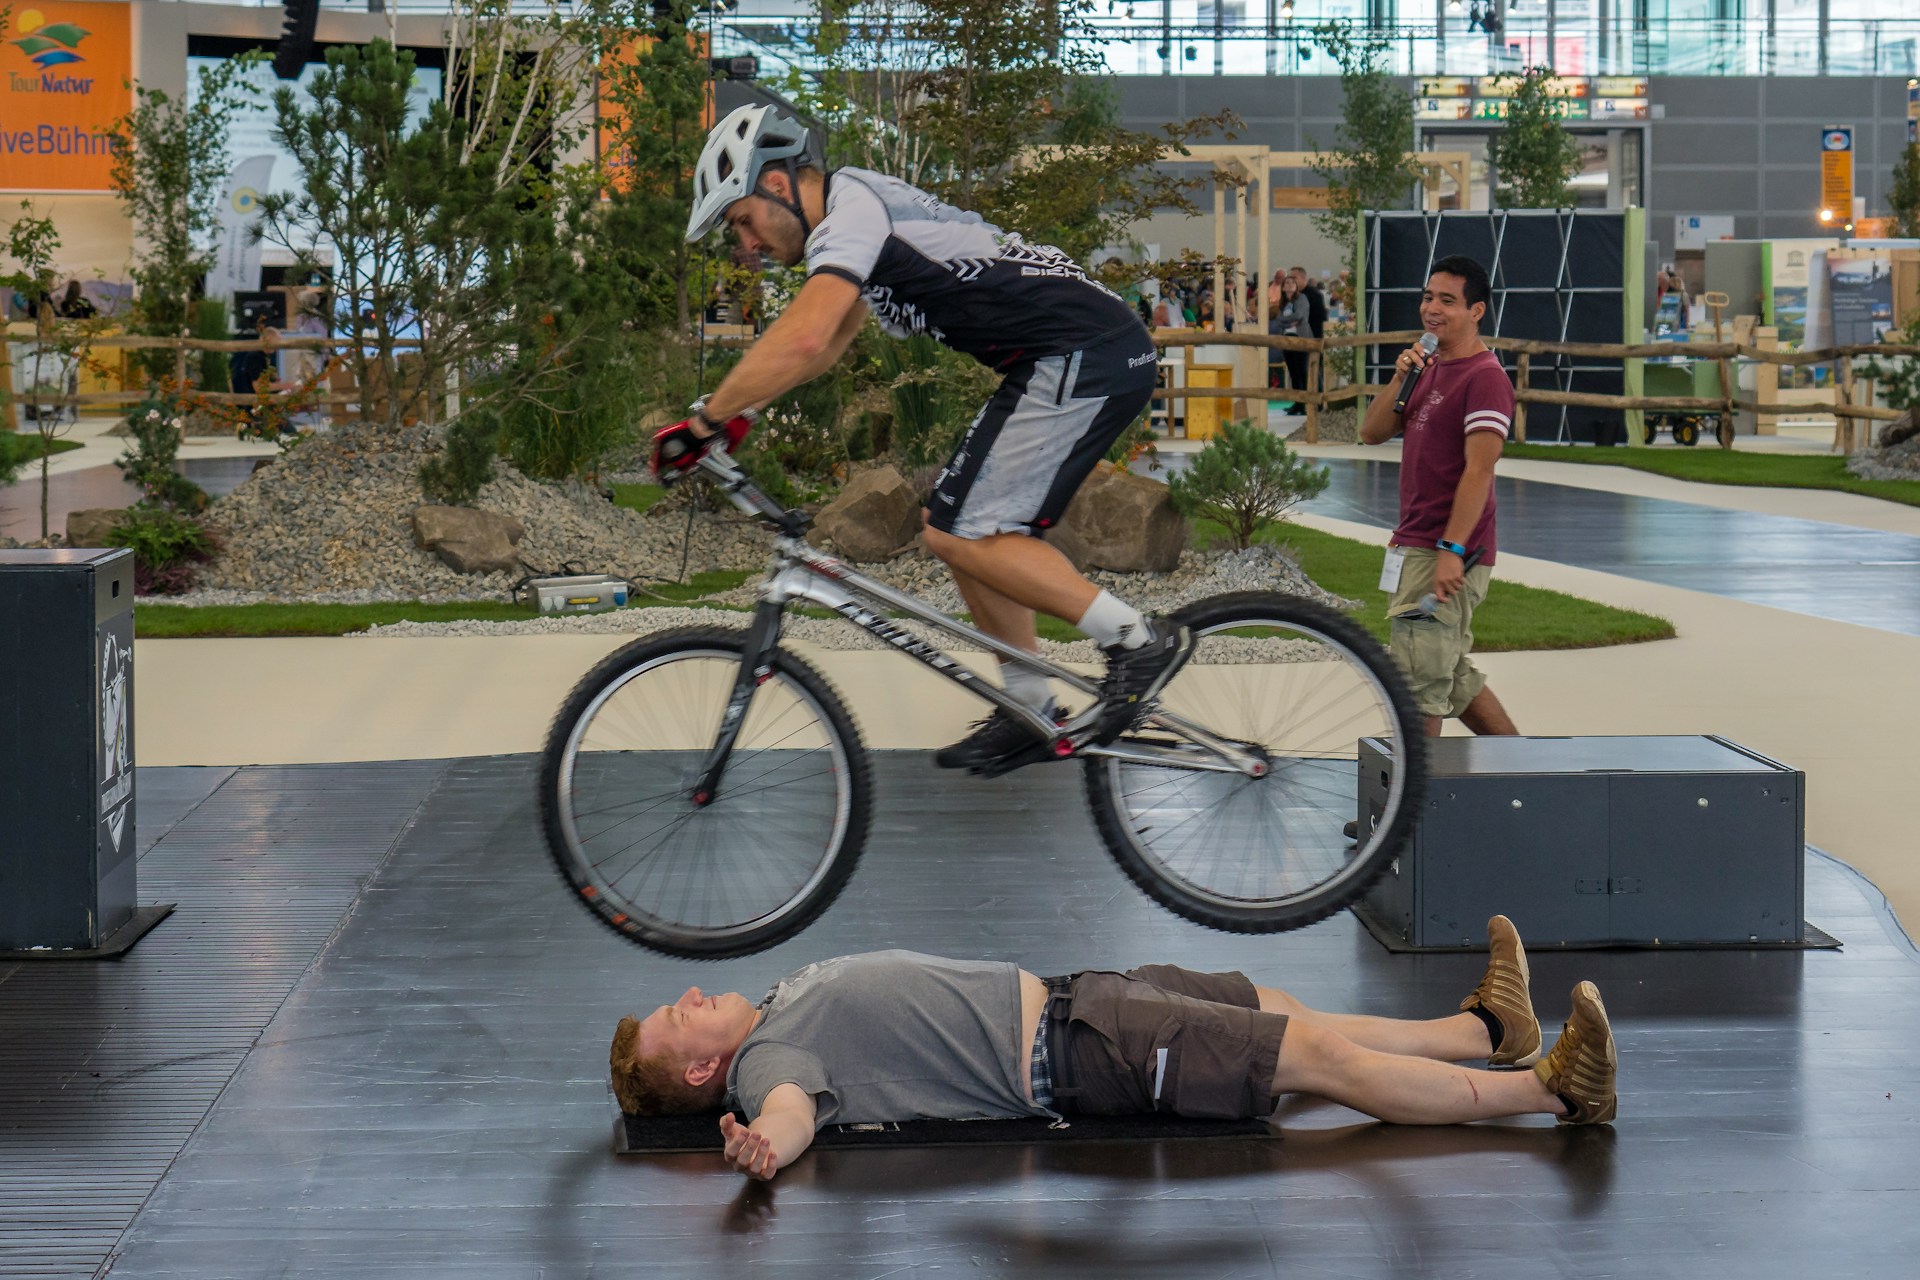 Two men performing a dangerous stunt on a bicycle